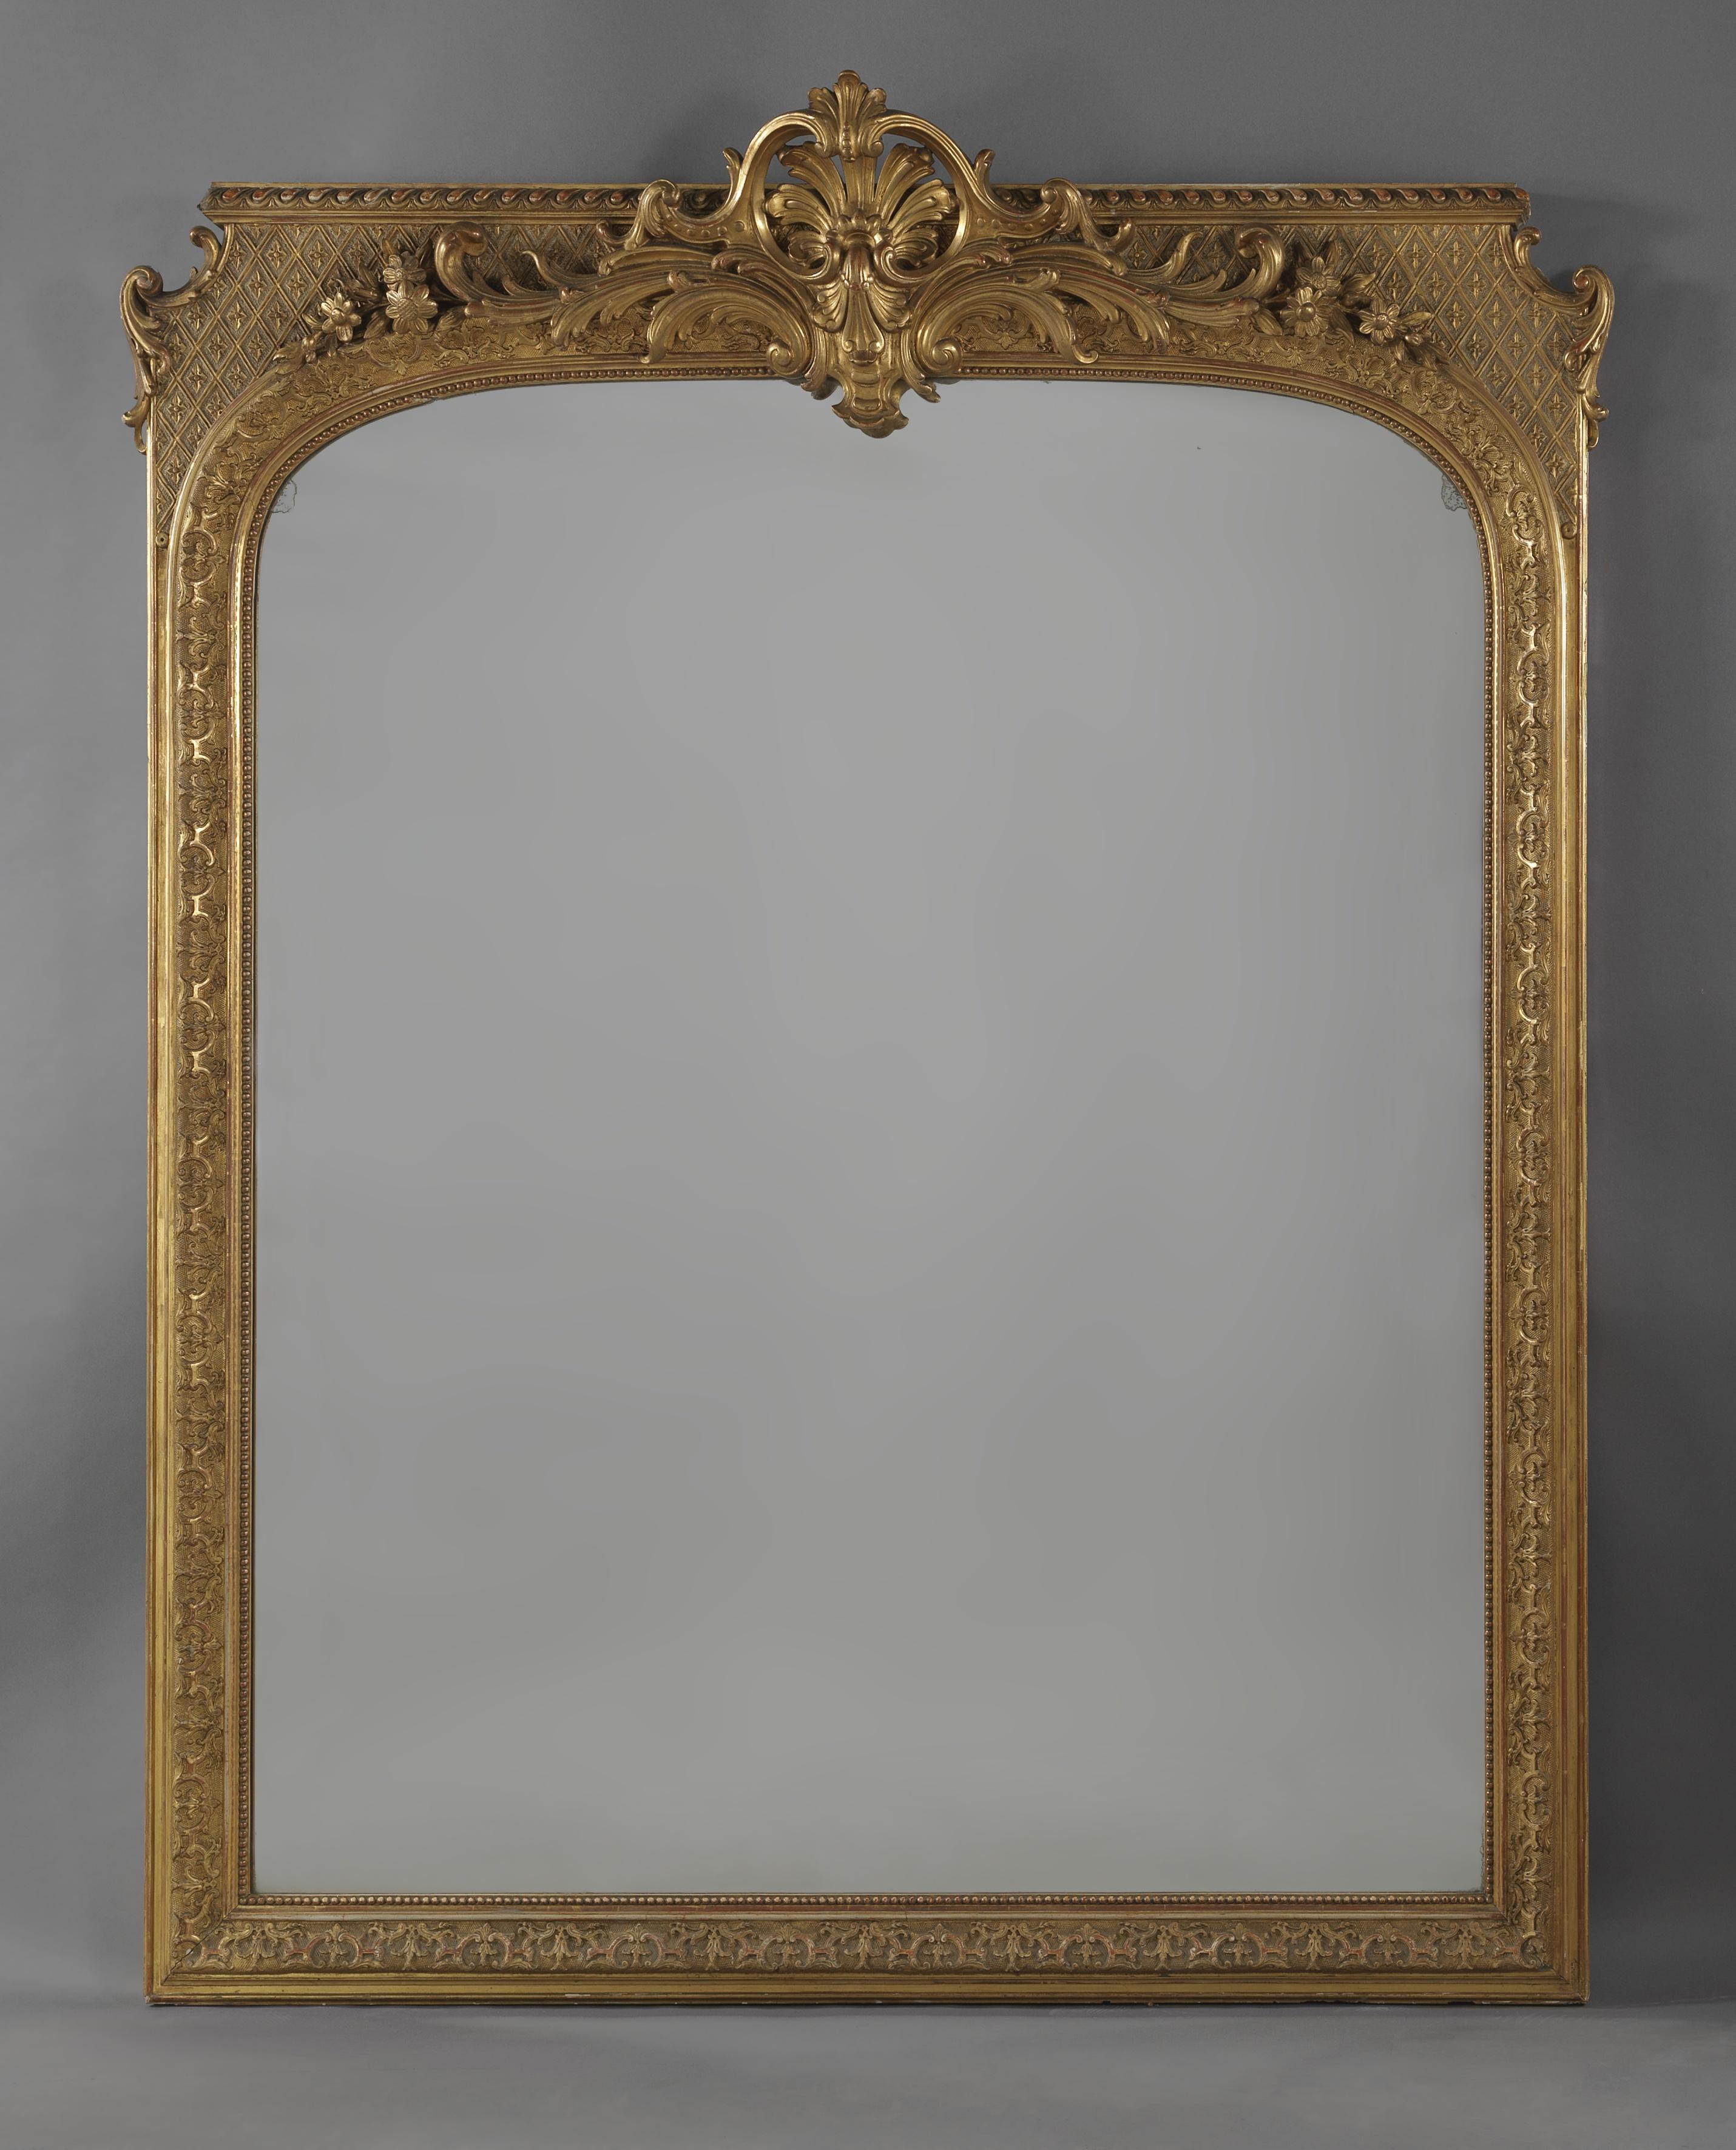 A Large Regence Style Carved Giltwood and Gesso Mirror.

French, Circa 1860. 

This fine mirror is almost 2m in height. The arched mirror plate is framed by carved uprights with beaded decoration and surmounted by an elaborate acanthus cast